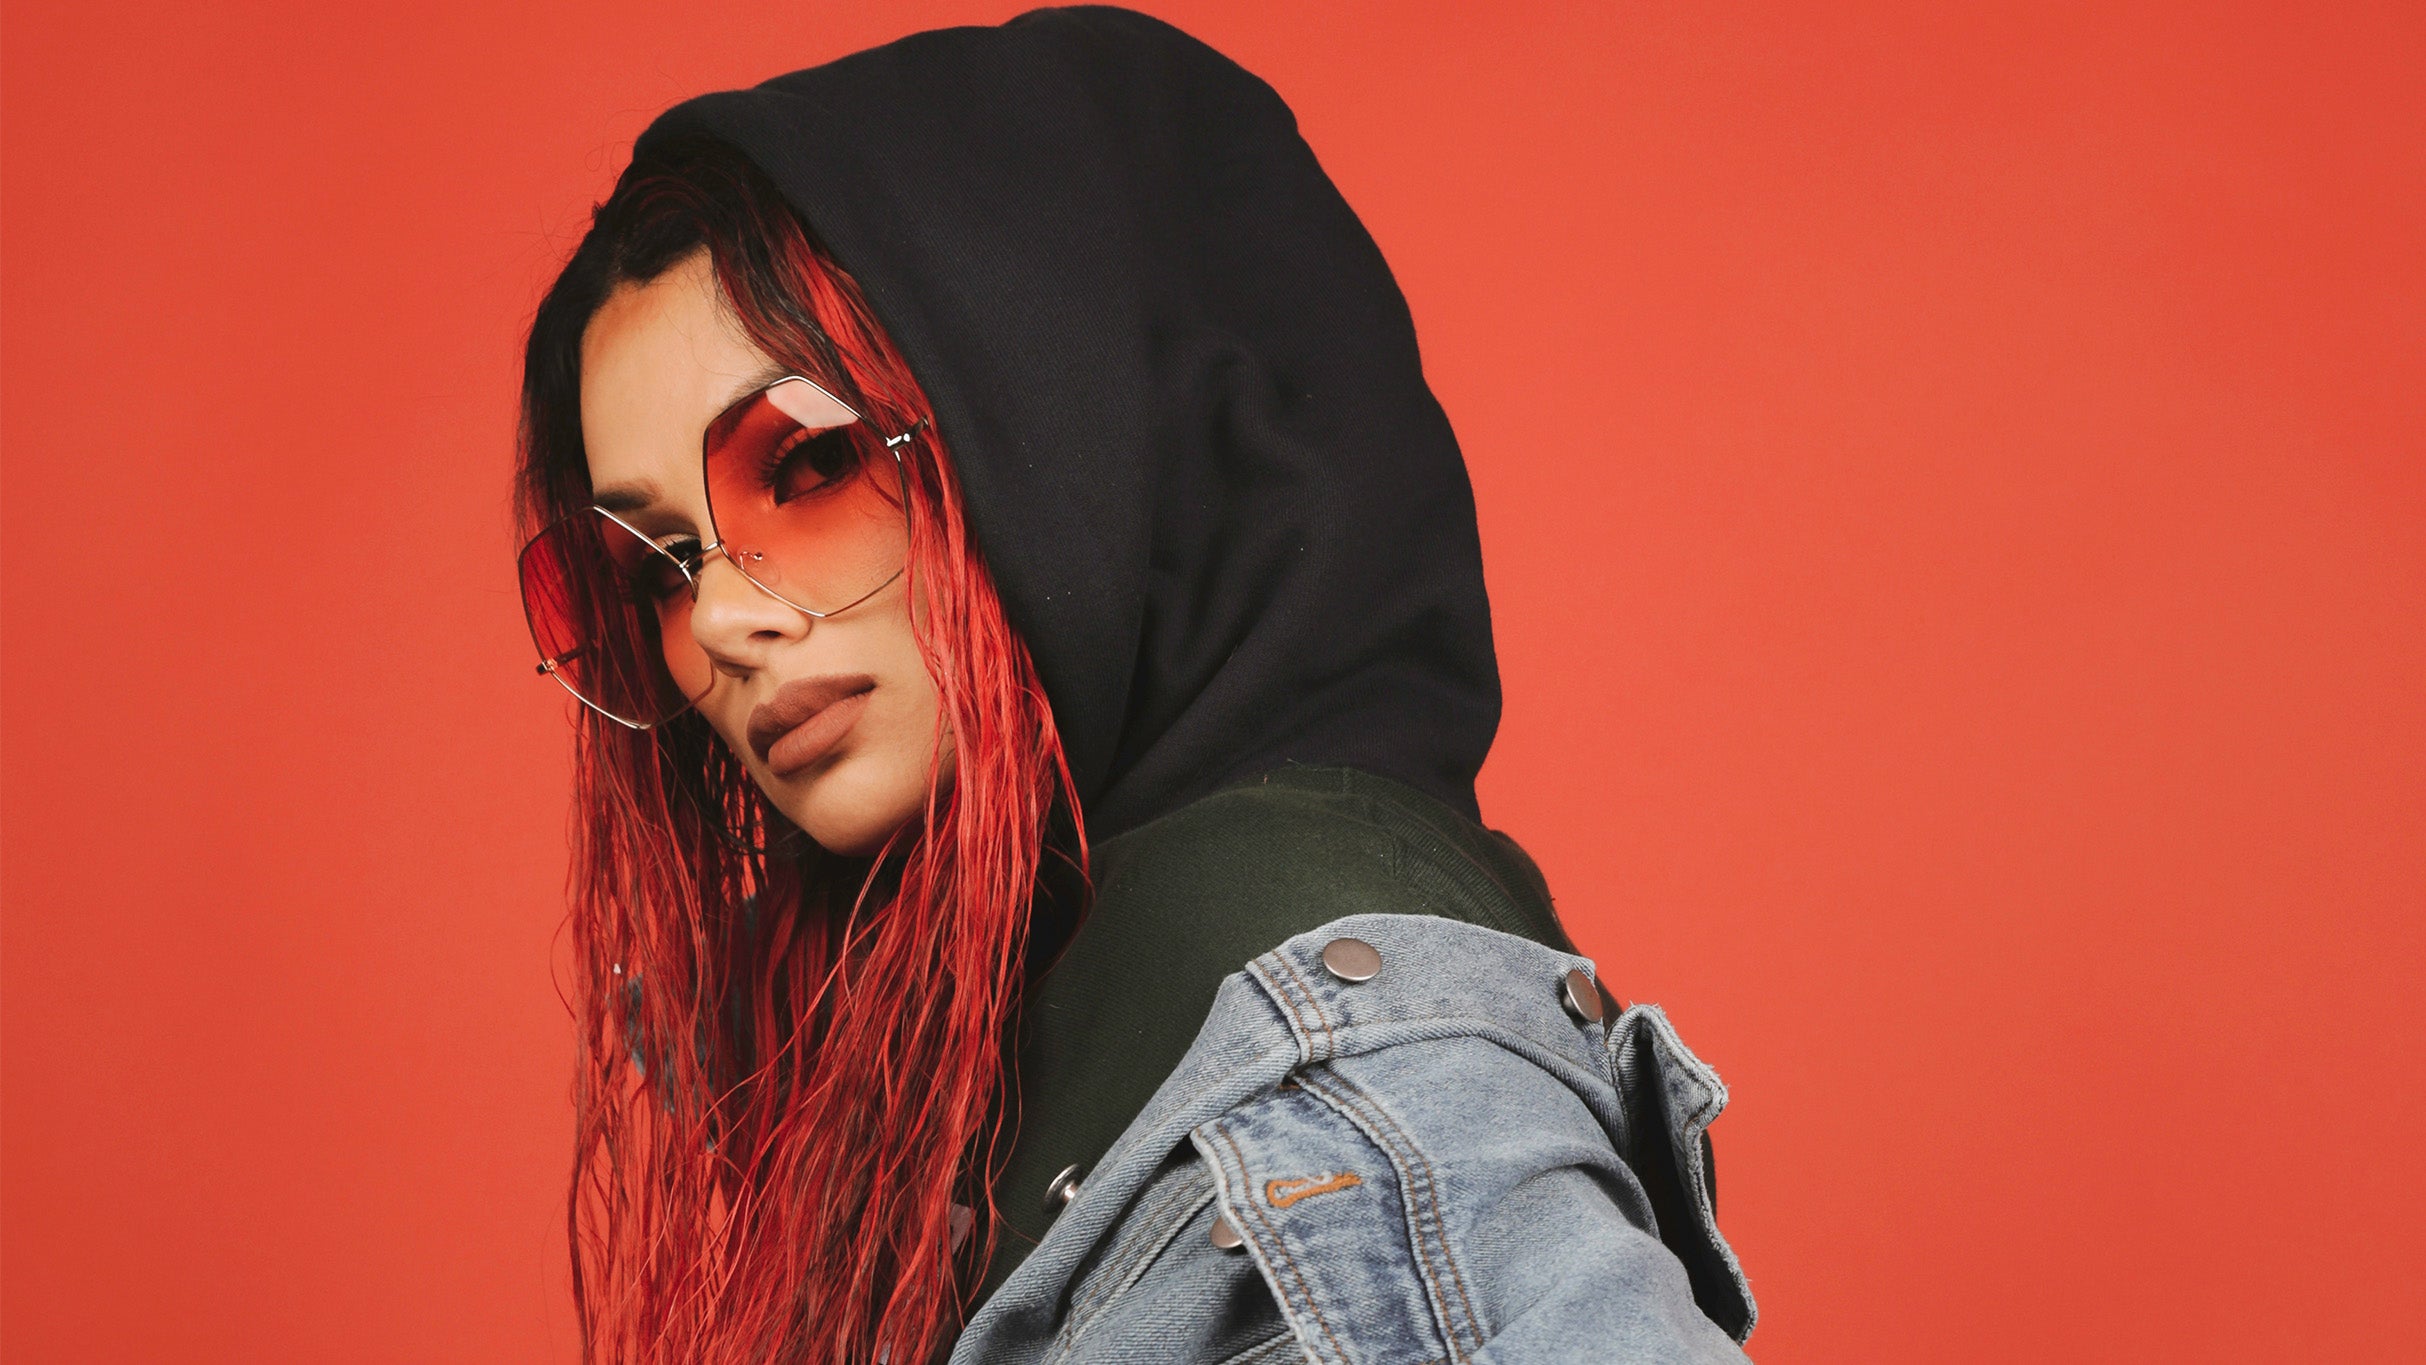 members only presale password for Snow Tha Product - Good Nights And Bad Mornings Tour presale tickets in Charlotte